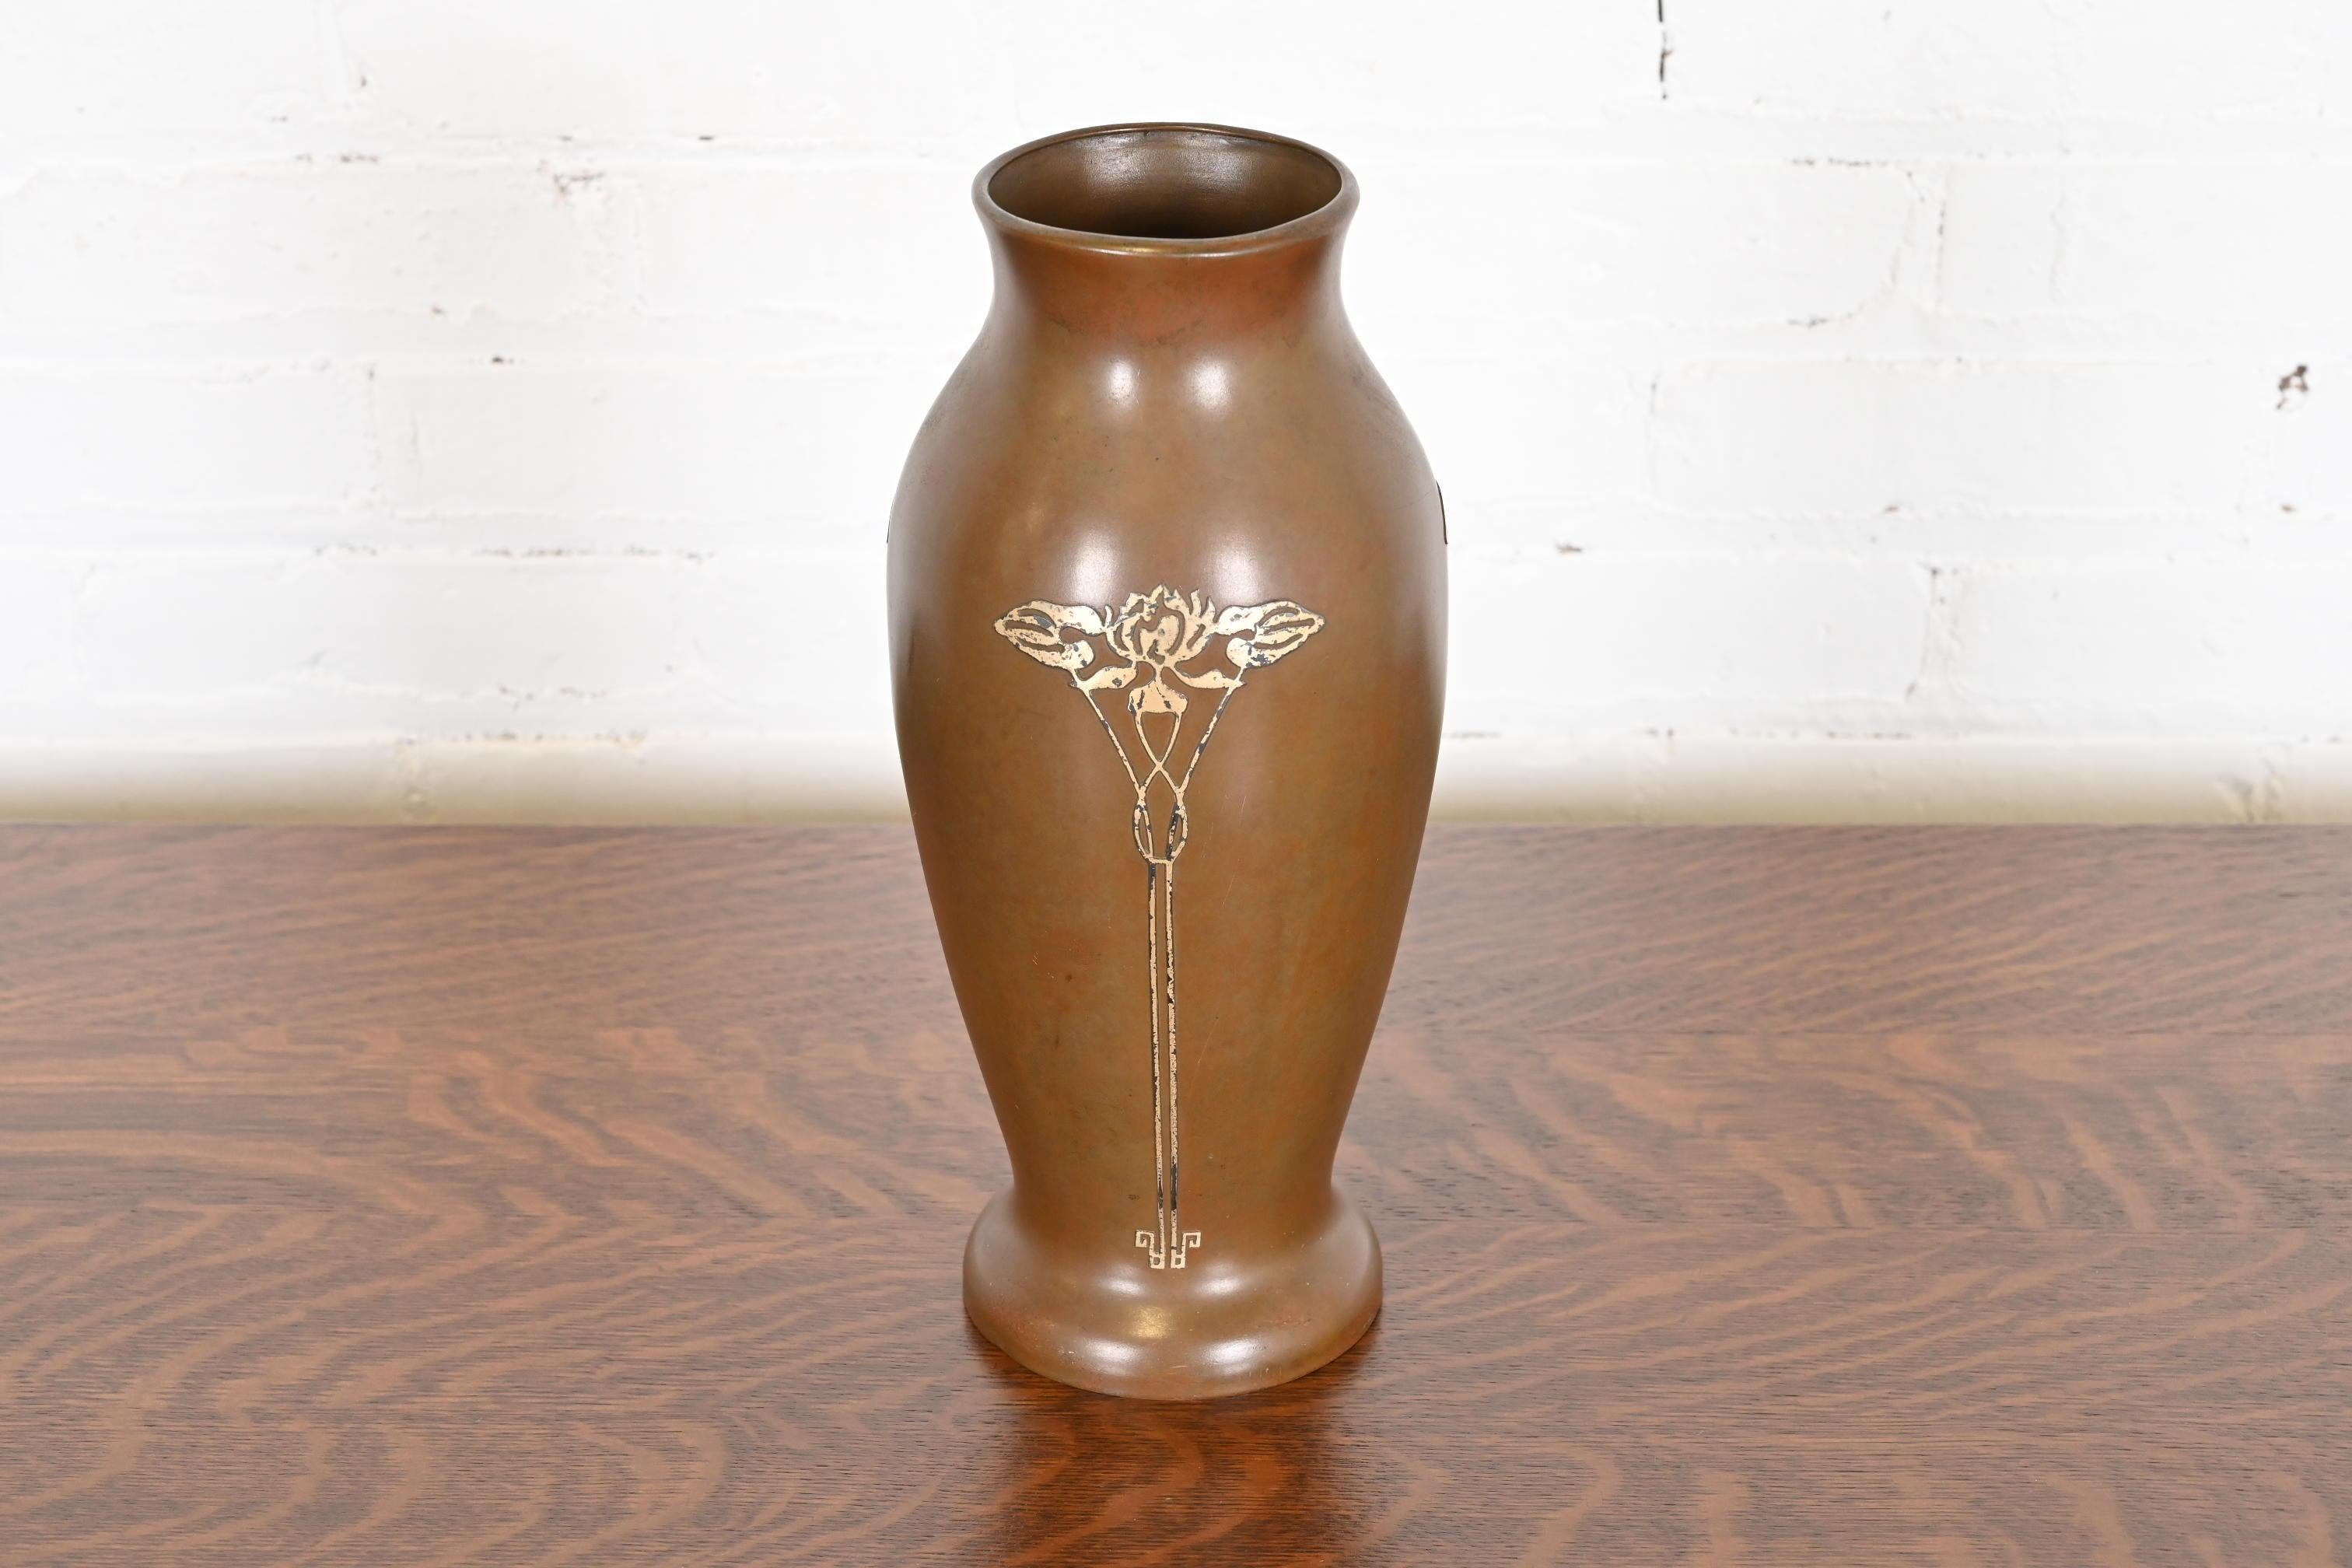 A beautiful Arts & Crafts period sterling silver on bronze large floral vase

By Silver Crest (the mark of Smith Metal Arts Co.), an offshoot of Heintz Art Metal Shop

USA, Early 20th Century

Measures: 5.5